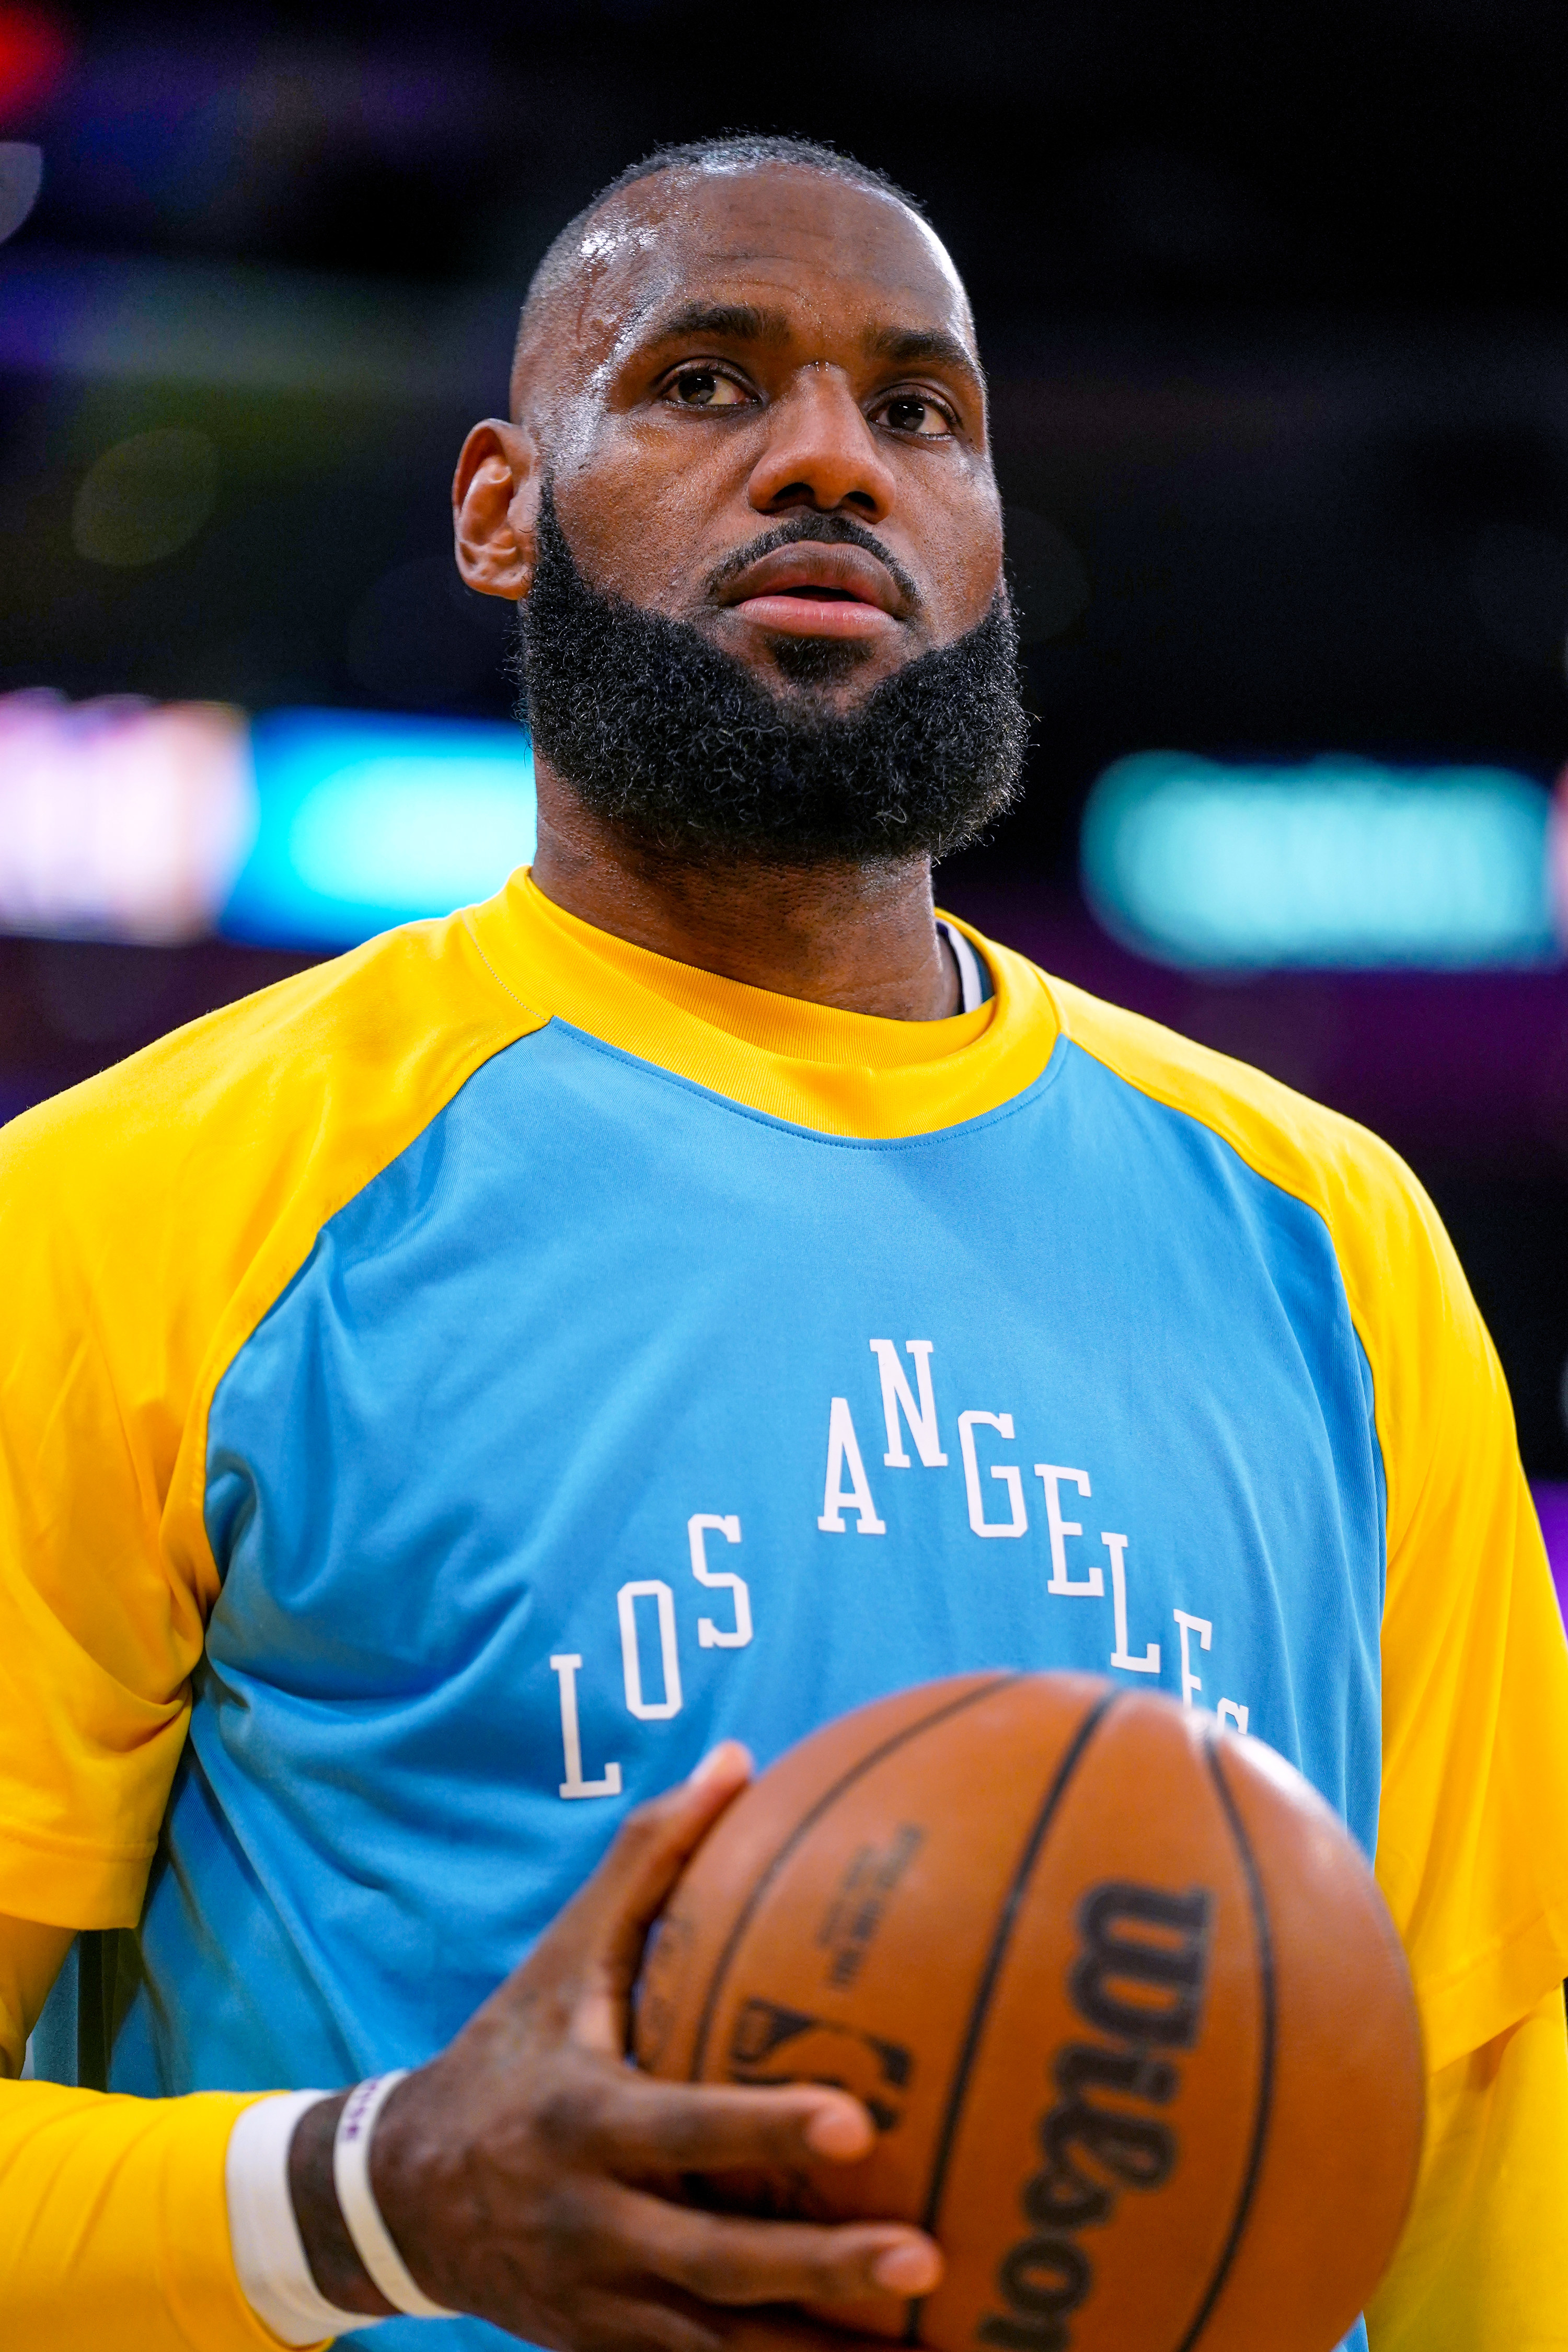 LeBron James is pictured in his Los Angeles Lakers gear as he prepares for a game against the New Orleans Pelicans on April 1, 2022